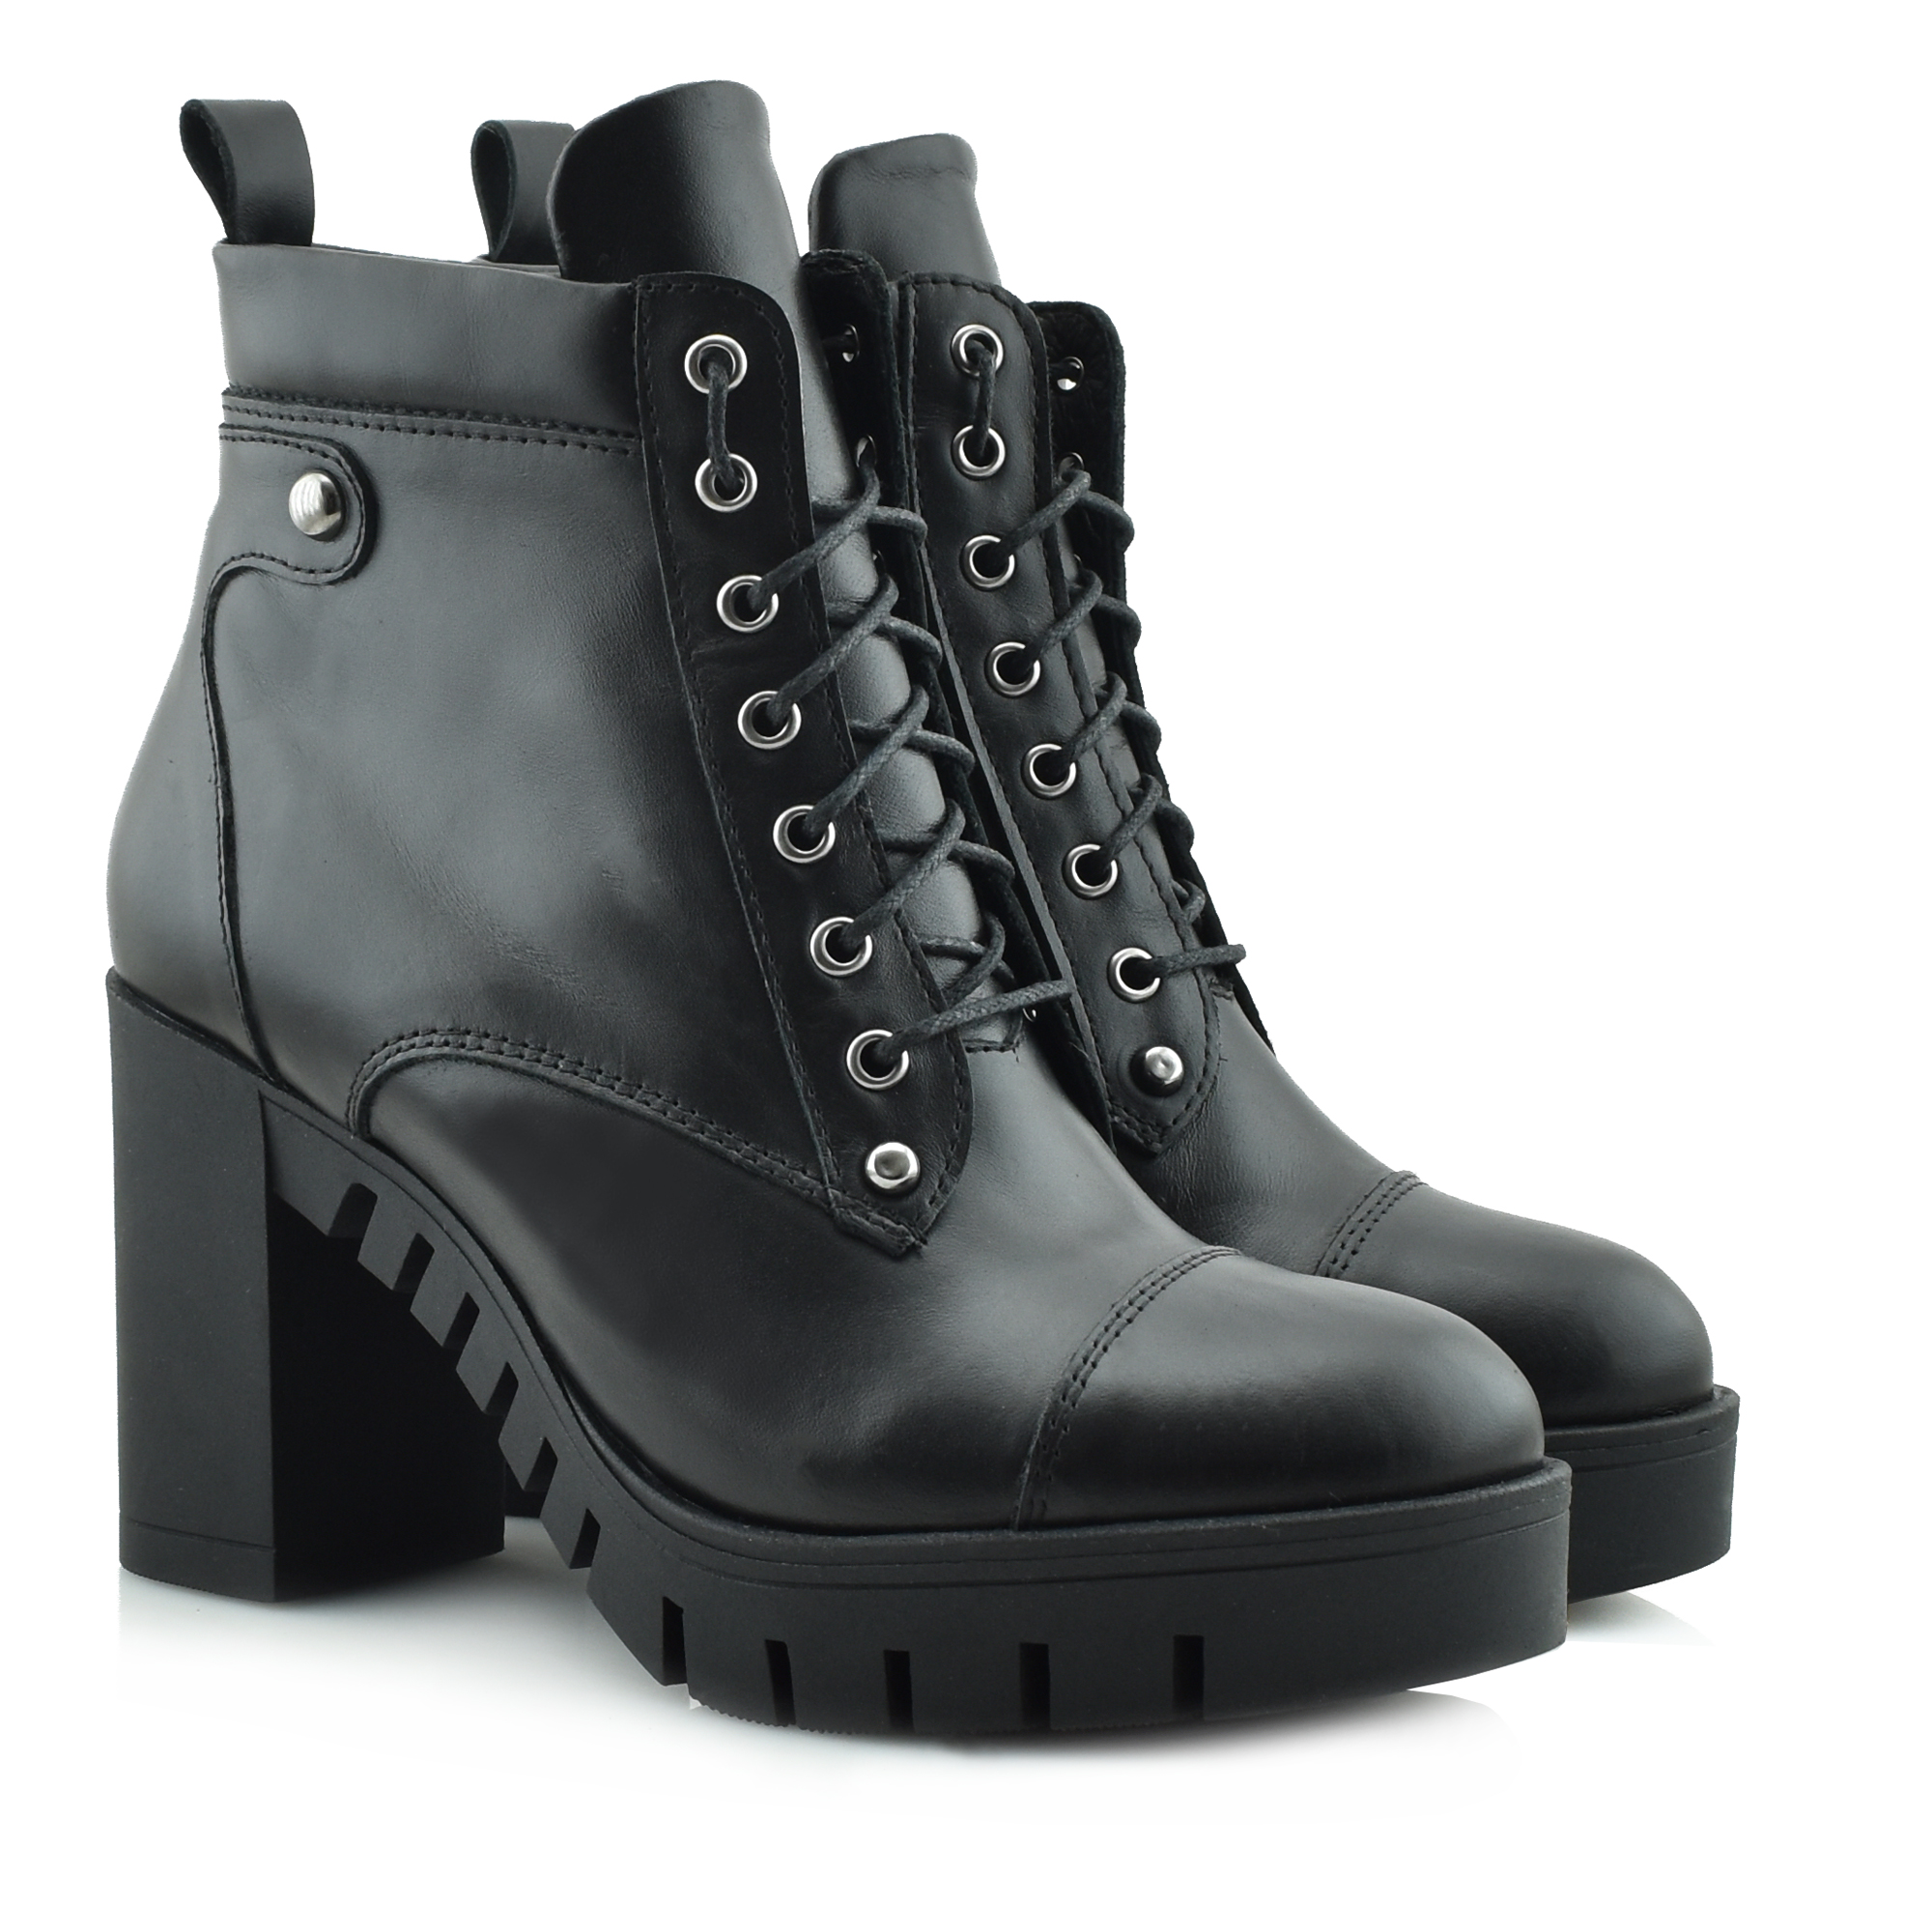 'ARIS TSOUBOS' DESIGNER BOOT WITH LACES - 20452